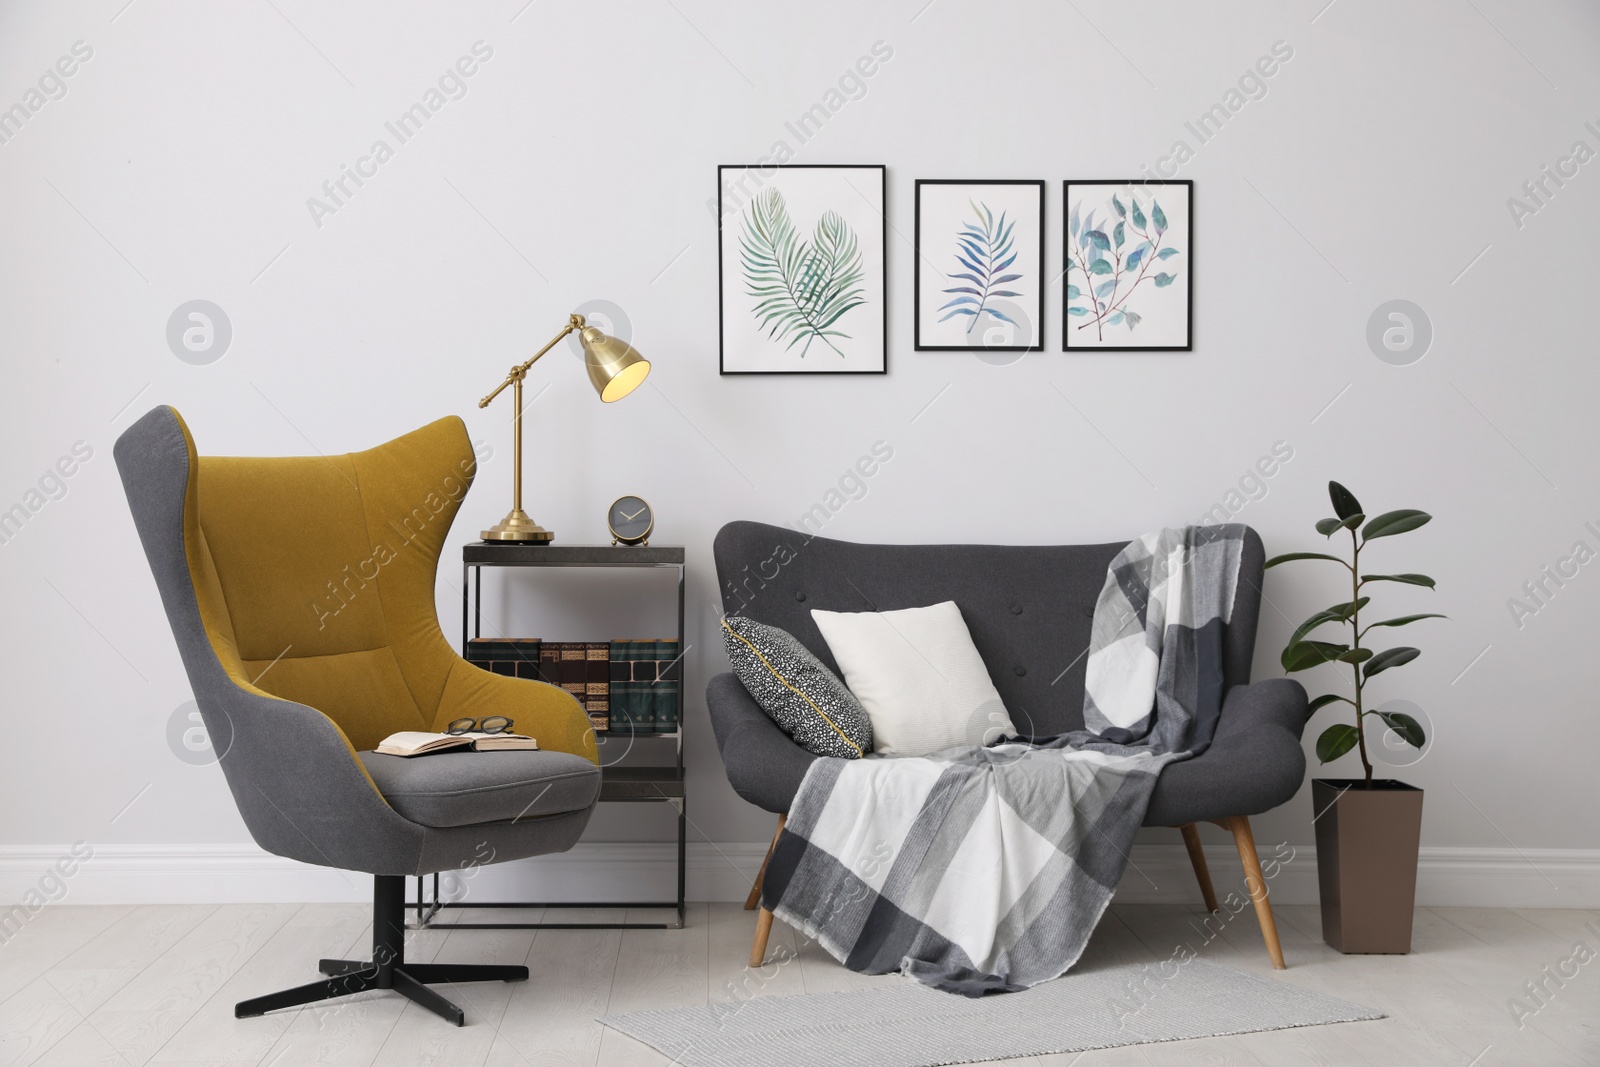 Photo of Stylish room interior with comfortable armchair, sofa and paintings of tropical leaves